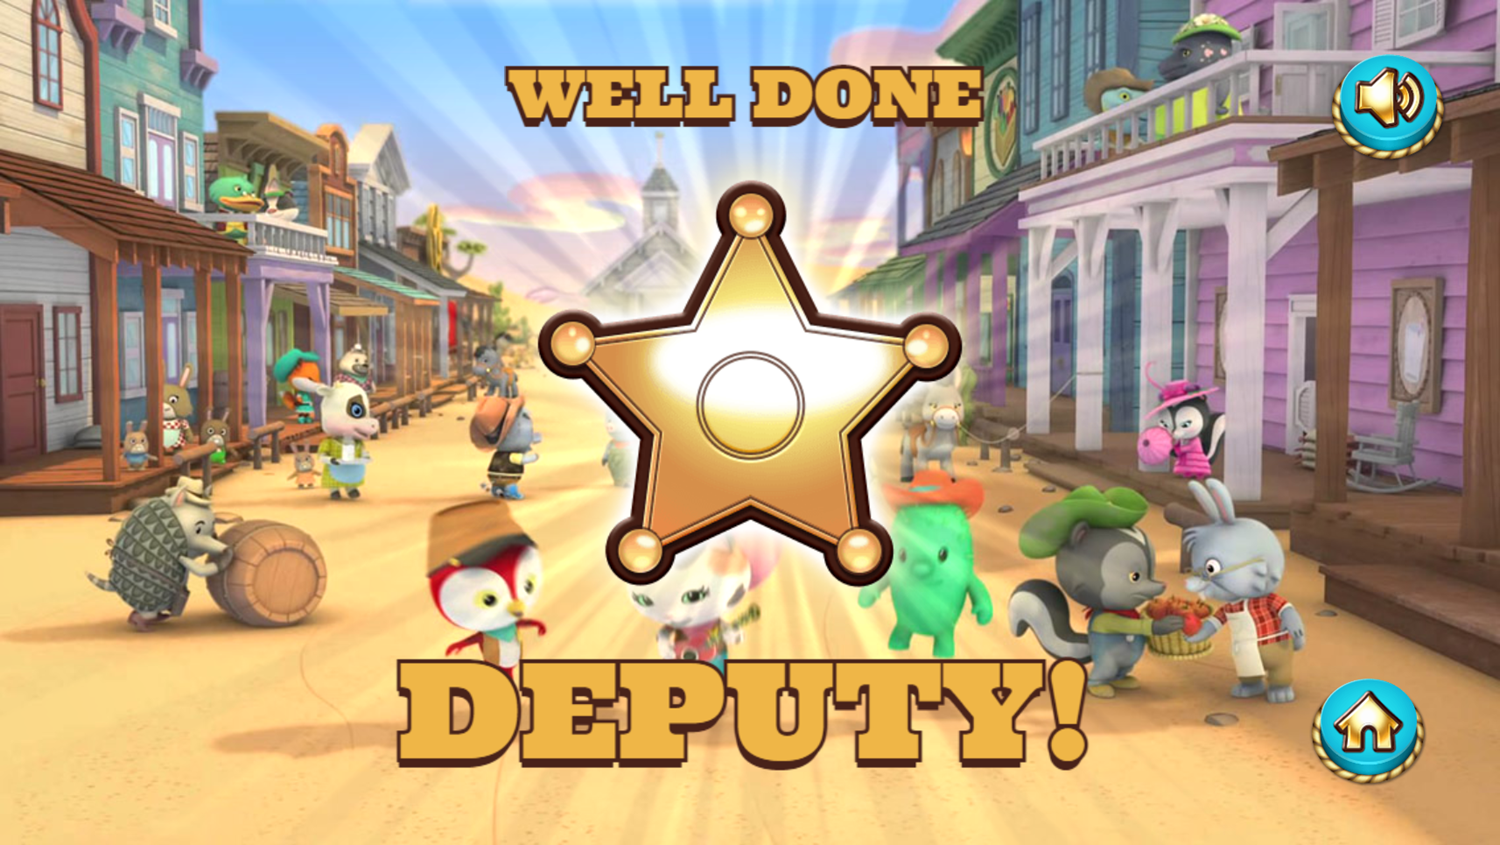 Sheriff Callie's Wild West Deputy for a Day Game Complete Screenshot.